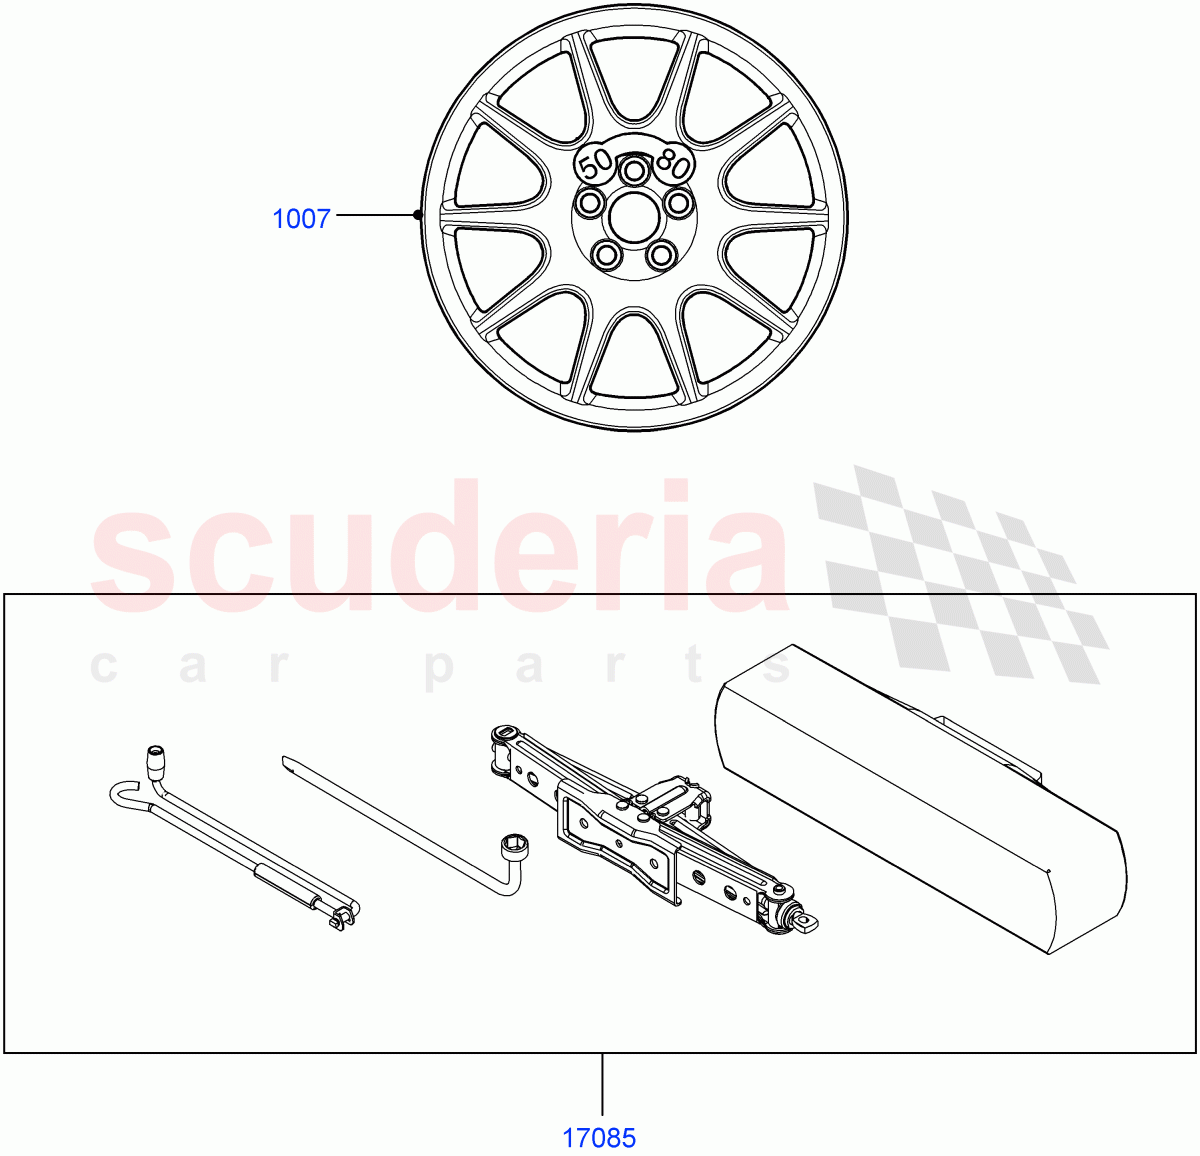 Accessory Wheels(Spare wheel kit) of Land Rover Land Rover Range Rover Sport (2014+) [4.4 DOHC Diesel V8 DITC]